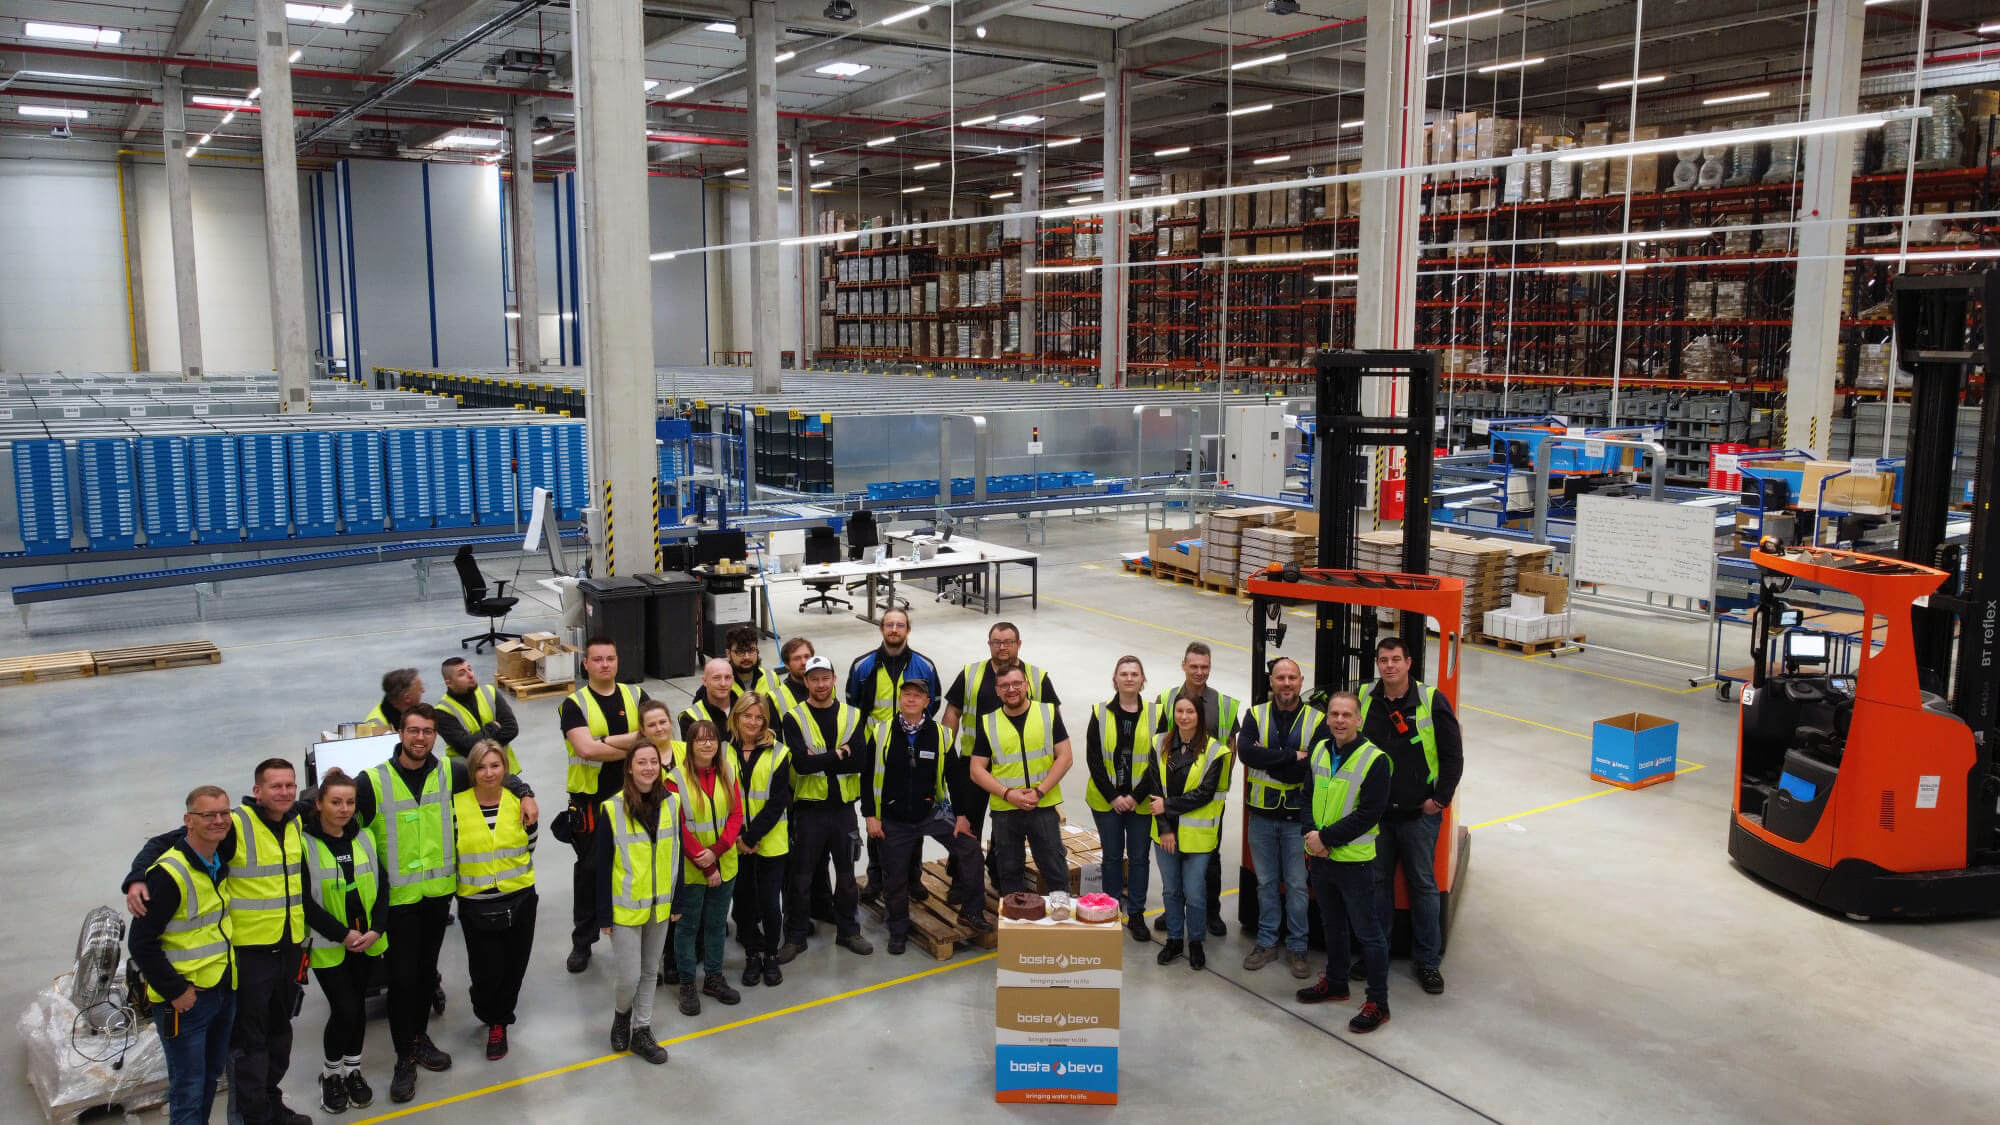 Second European Distribution Center opens in Poland